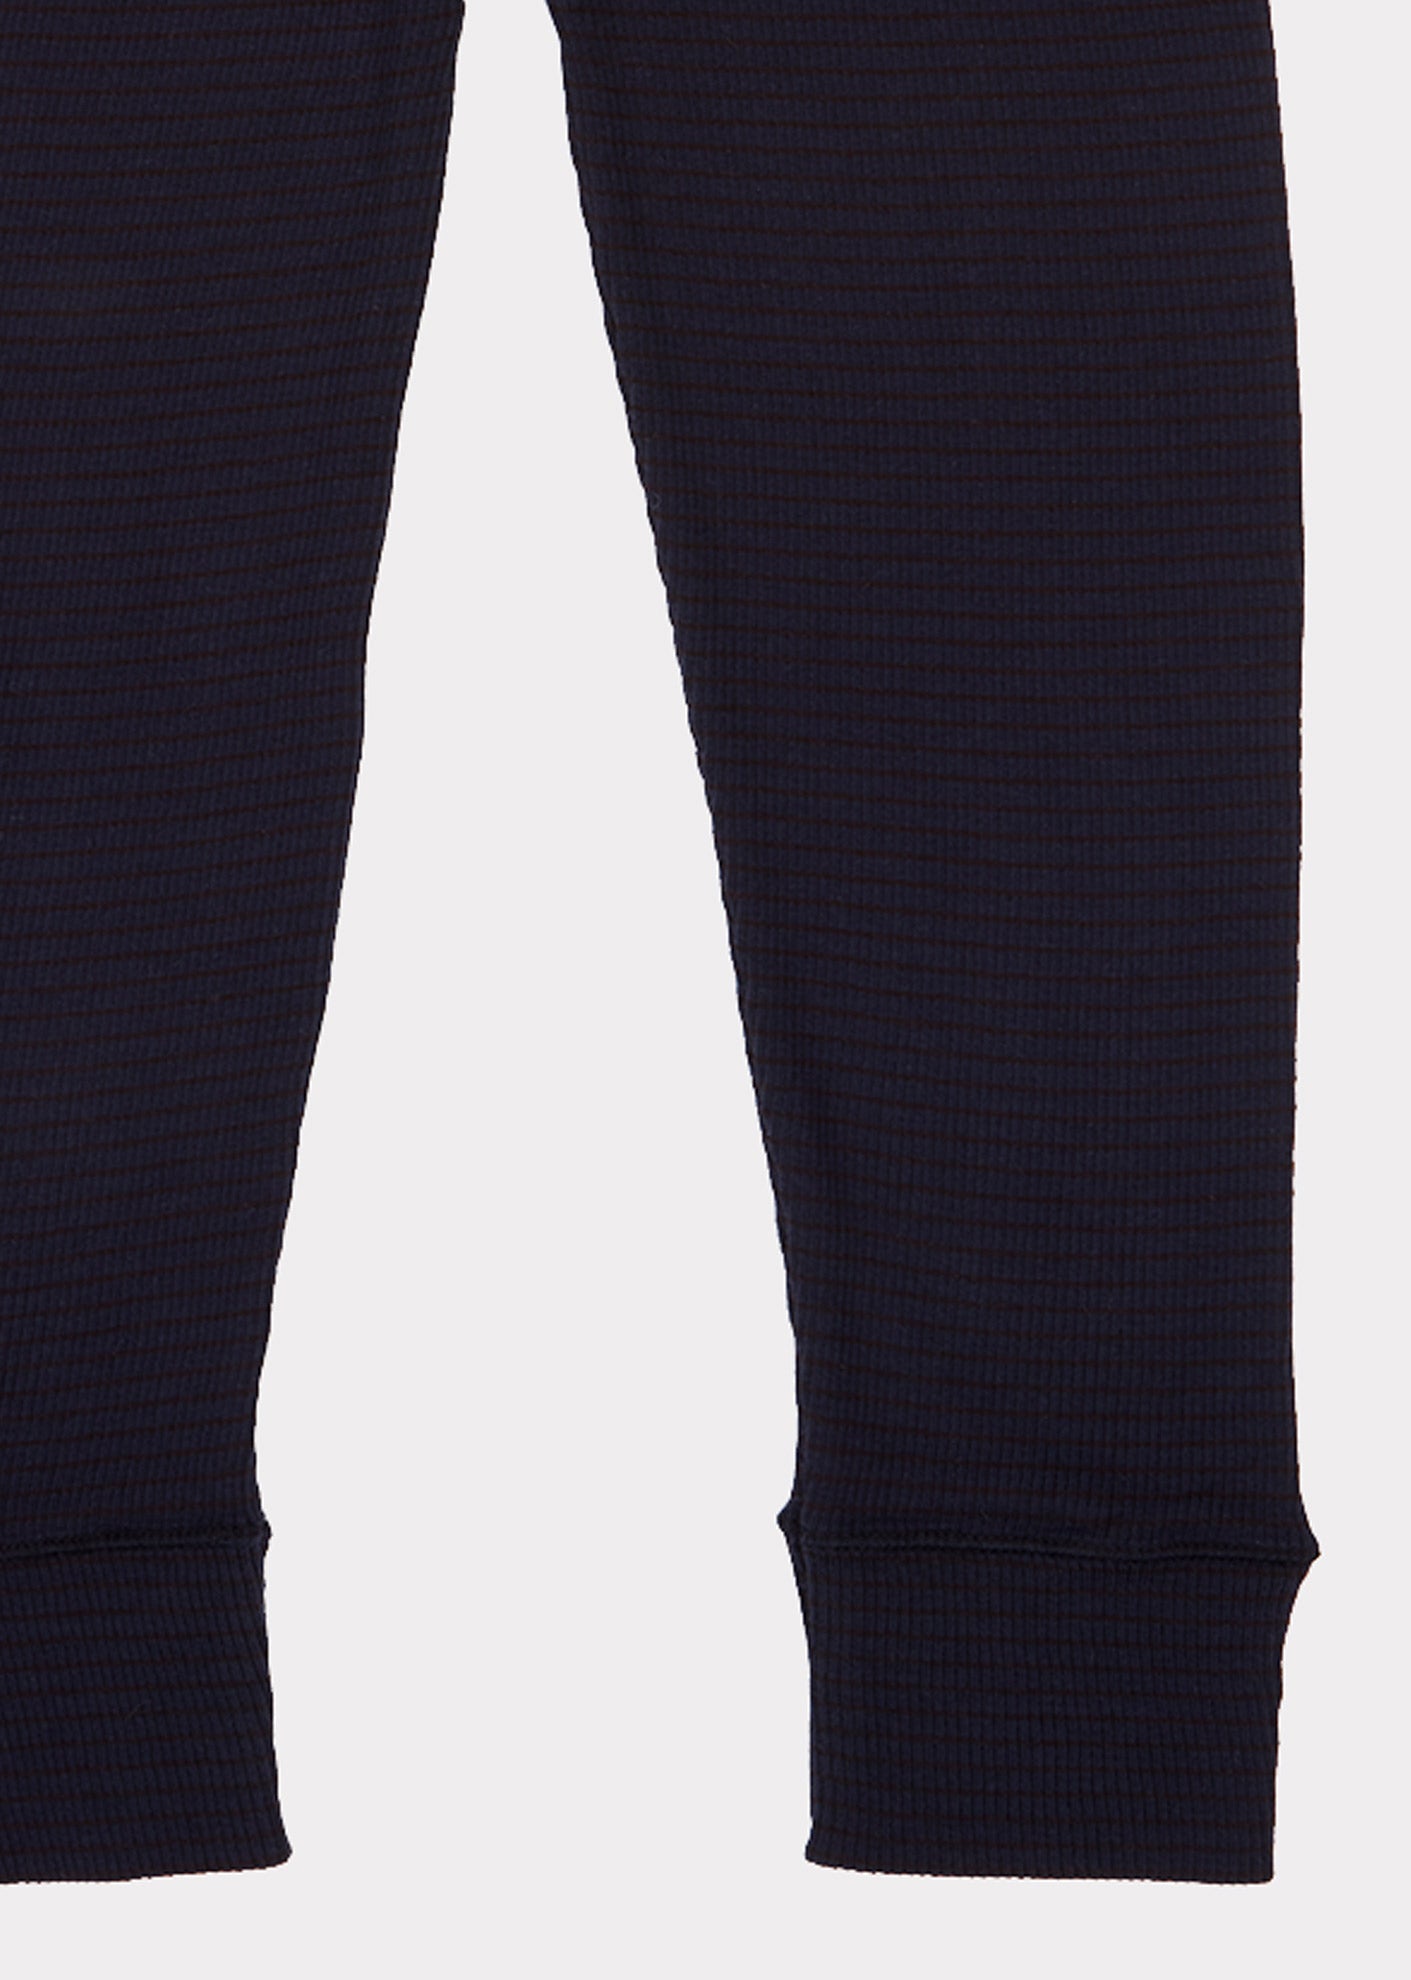 Boys & Girls Navy Striped Cotton Trousers